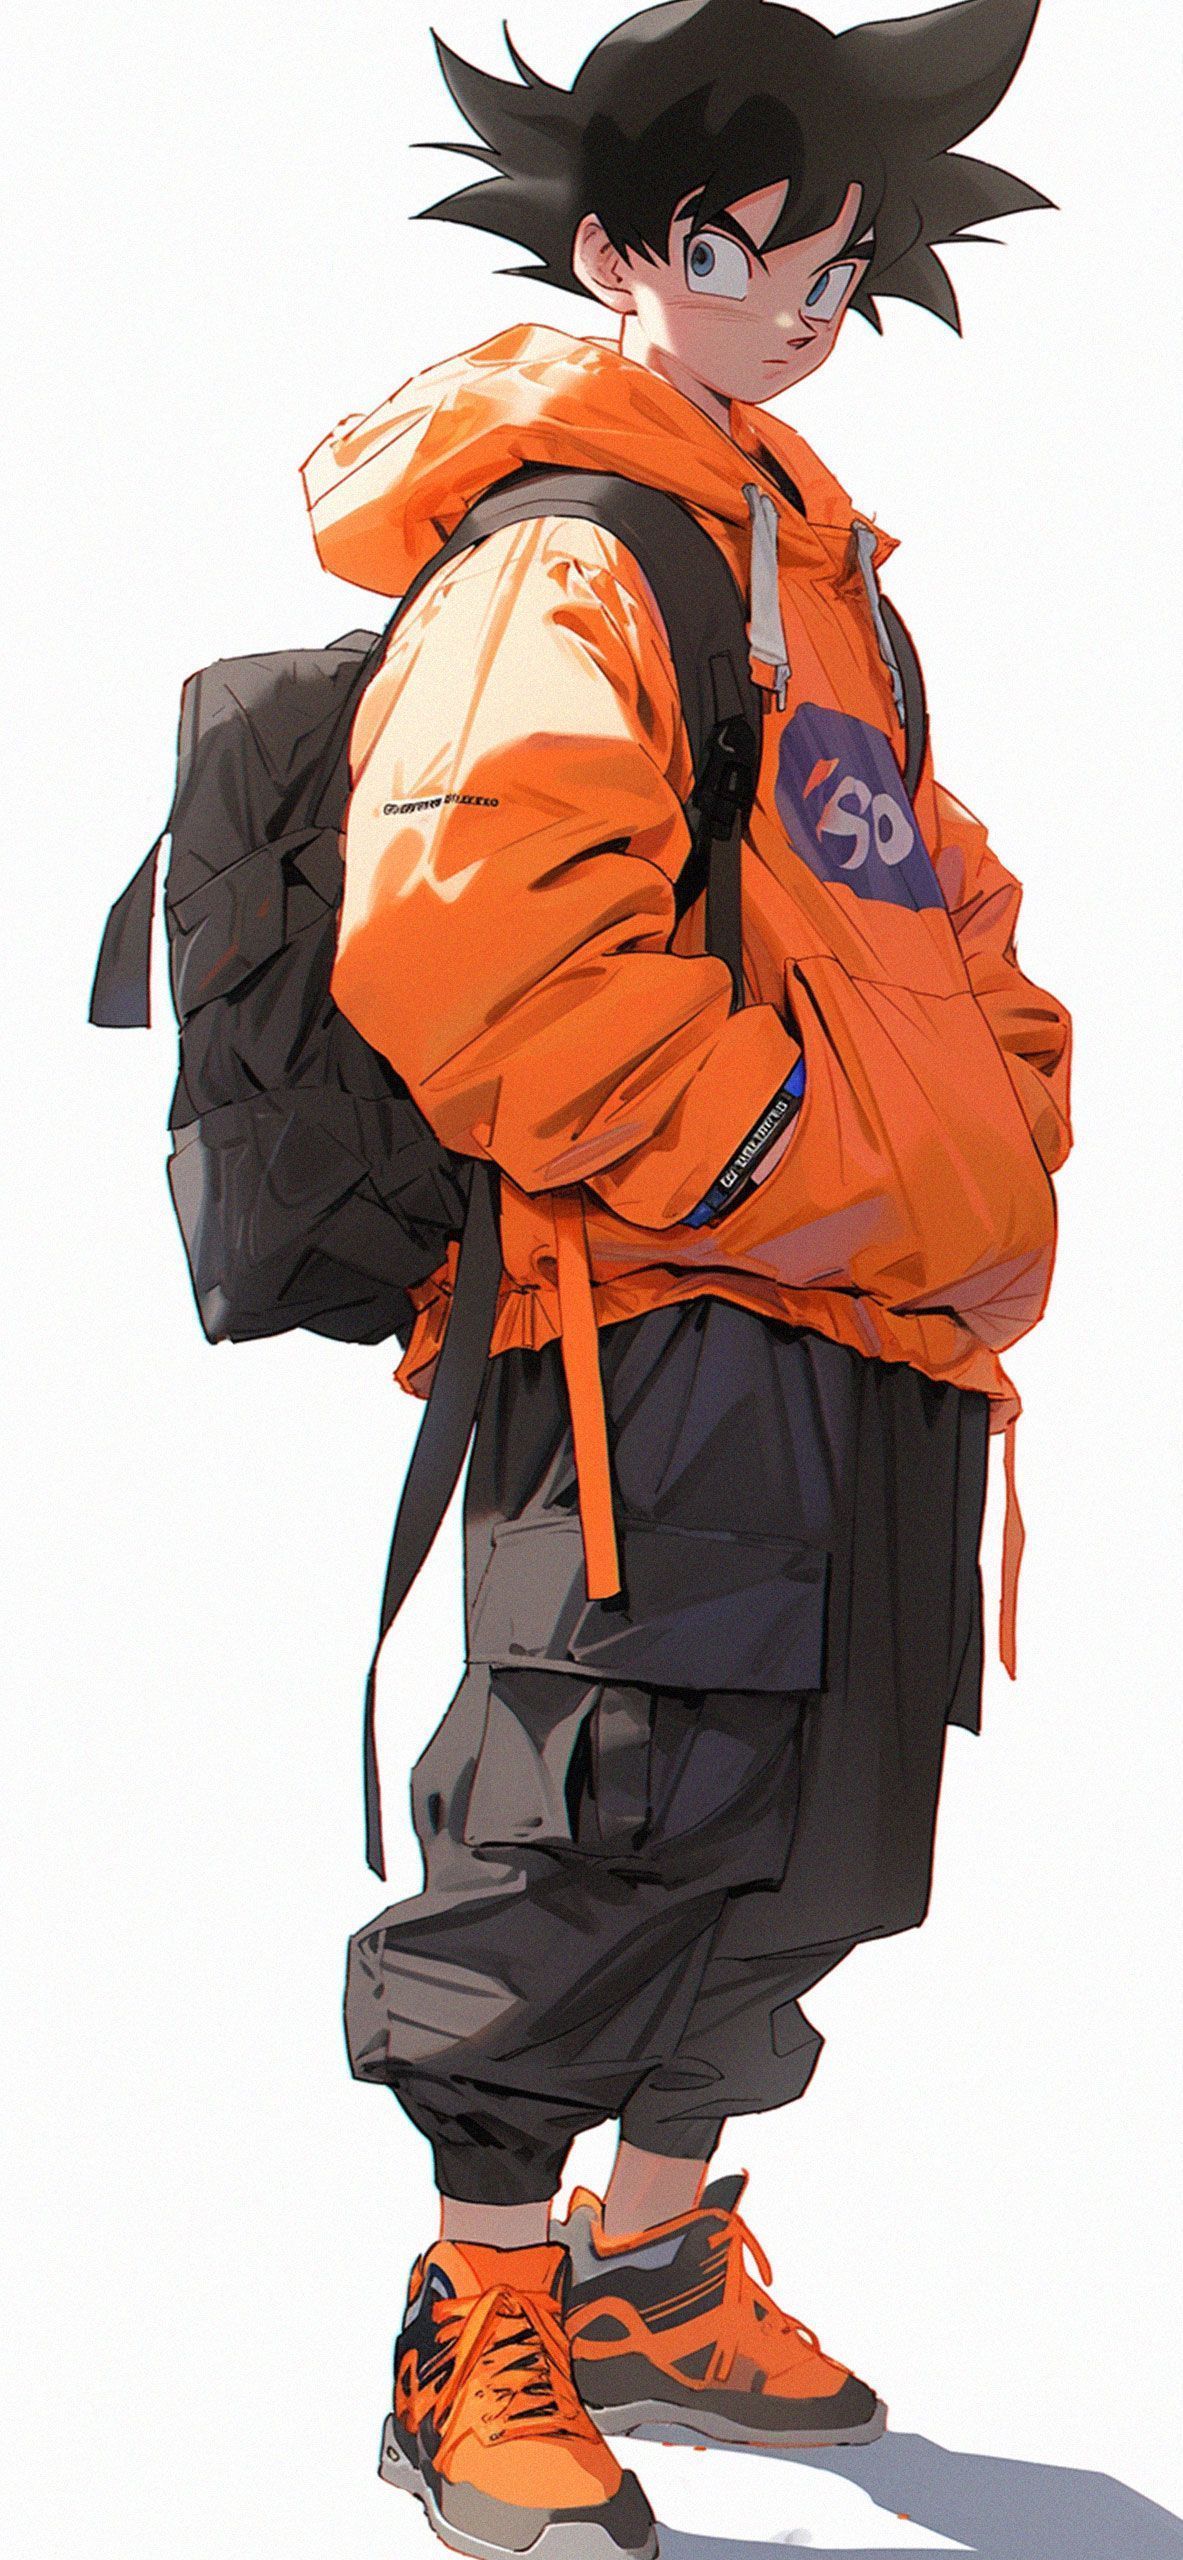 A character setting of Gohan from the Dragon Ball franchise, wearing an orange jacket and carrying a backpack. - Dragon Ball, Goku